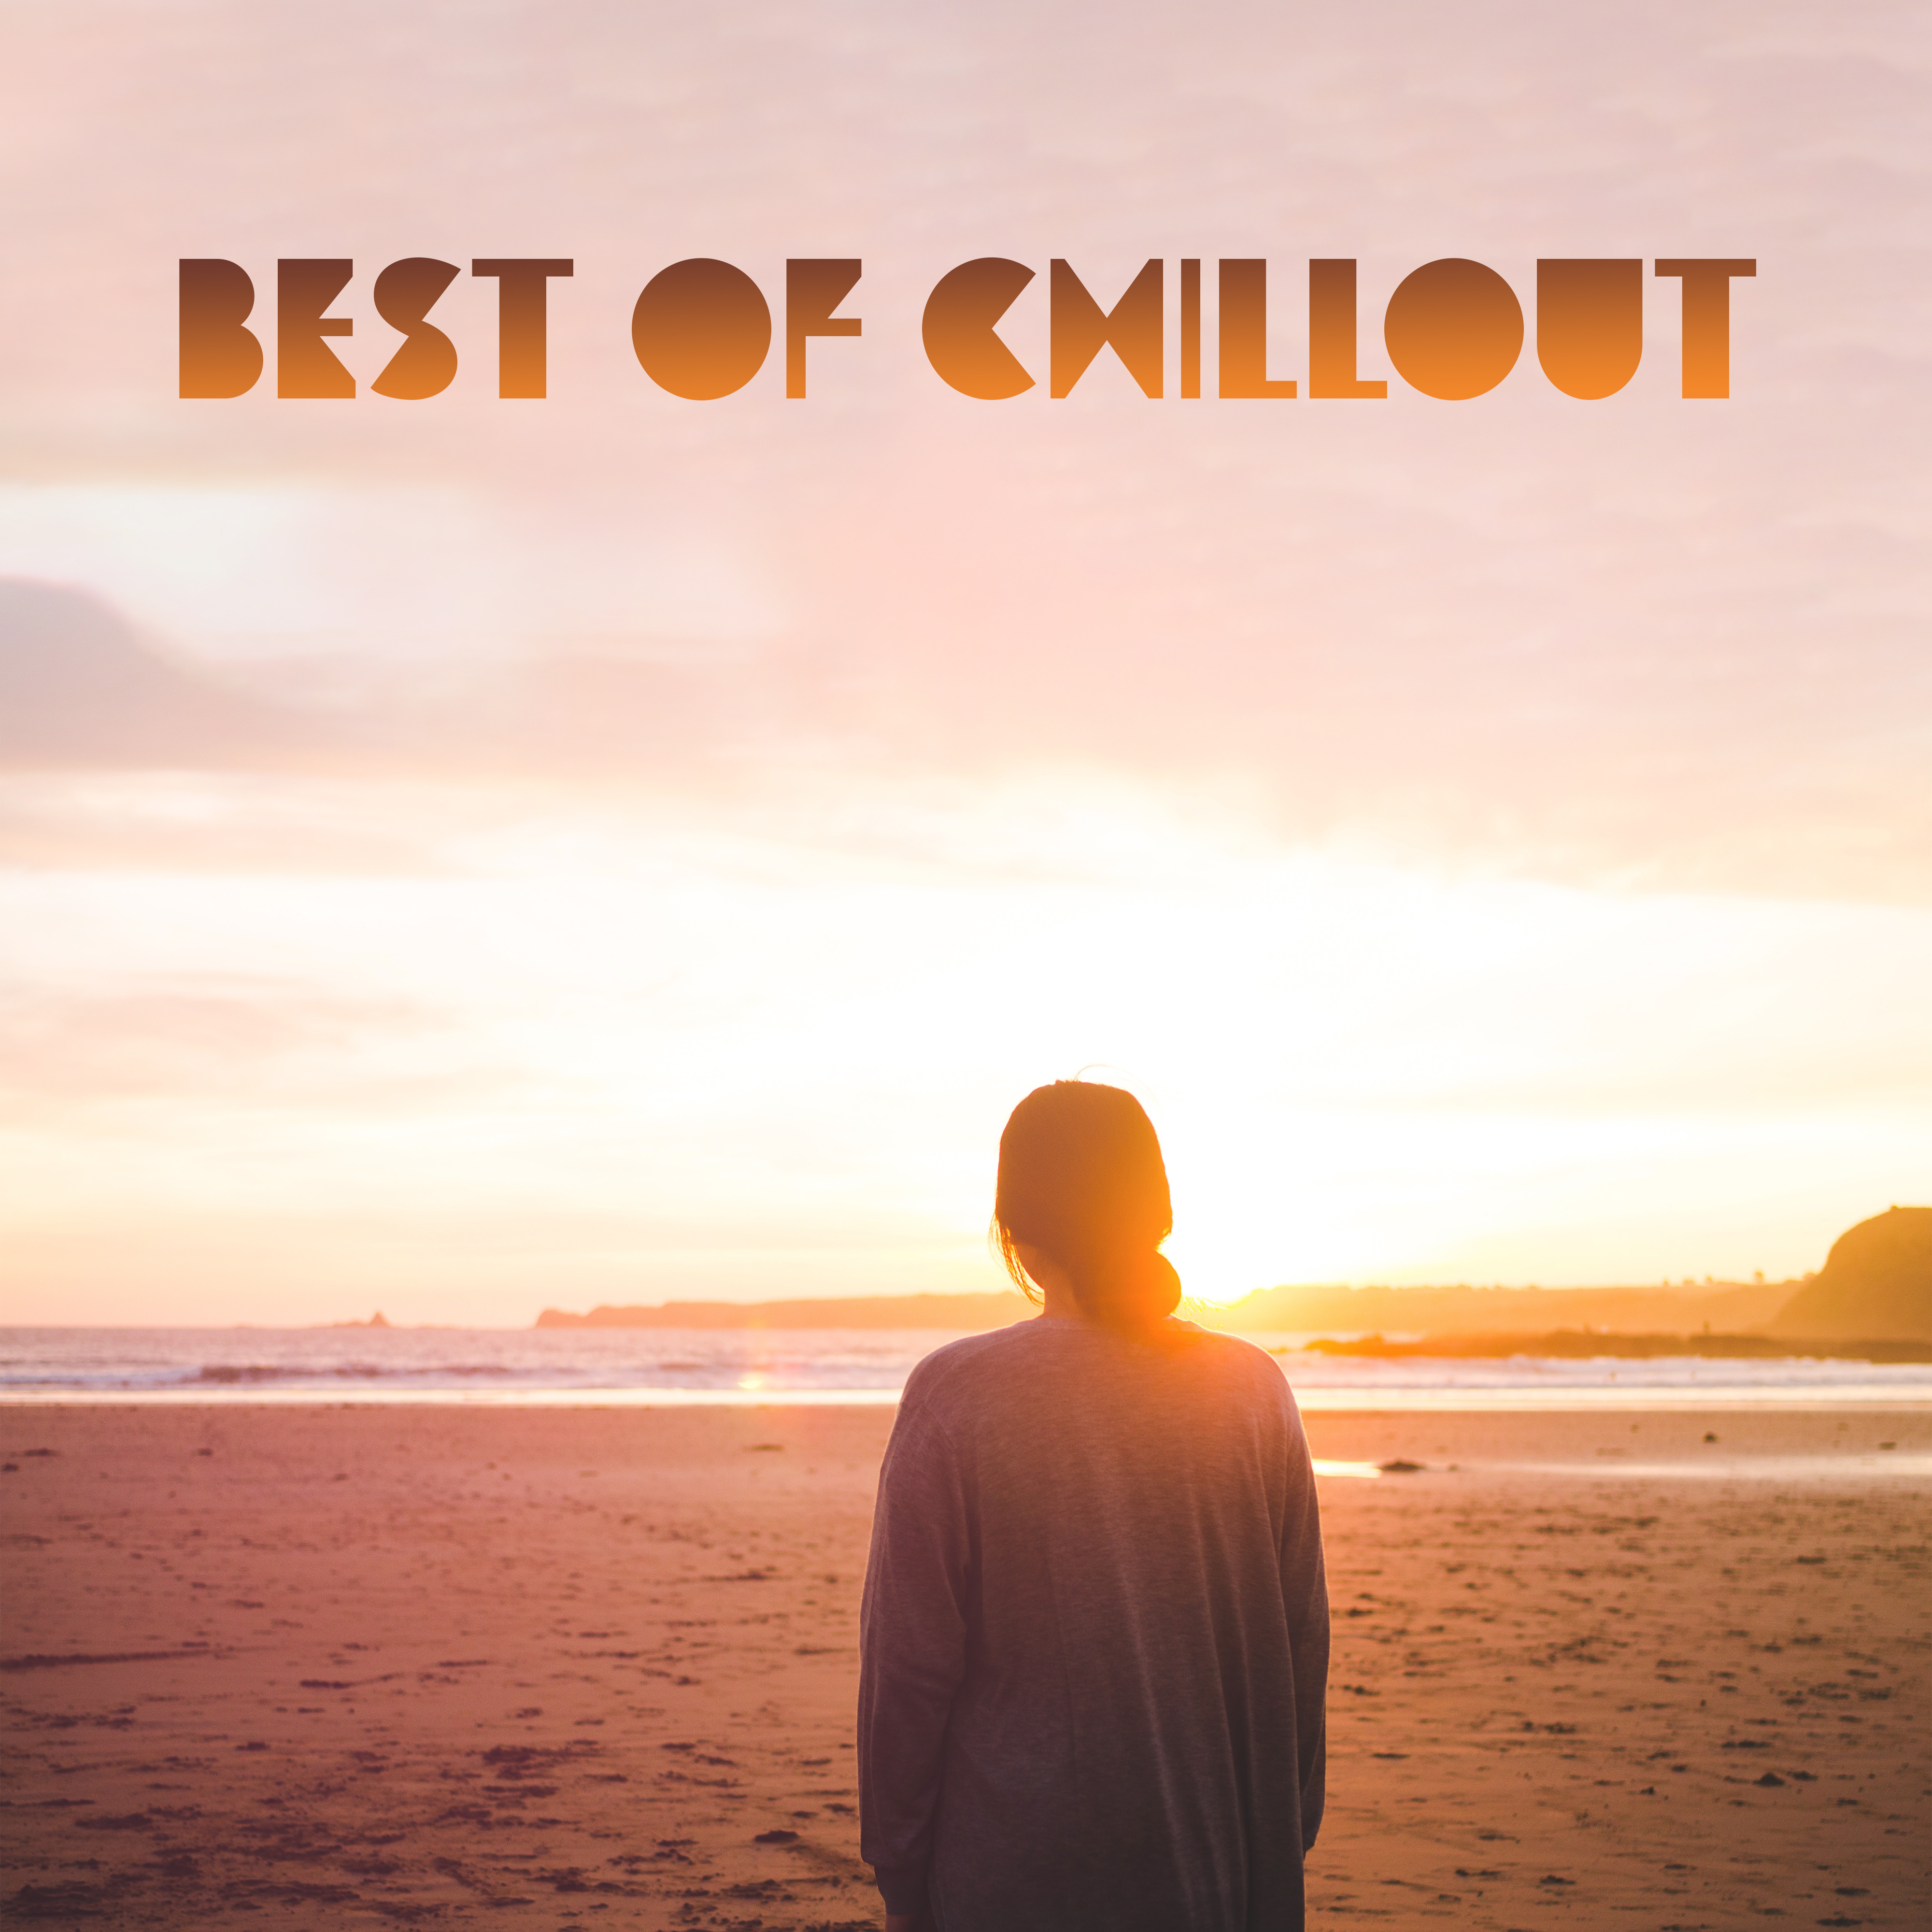 Best of Chillout  Smooth Music to Calm Down, Relaxing Beats, Chillout Sounds, Chilled Lounge House, Zero Stress